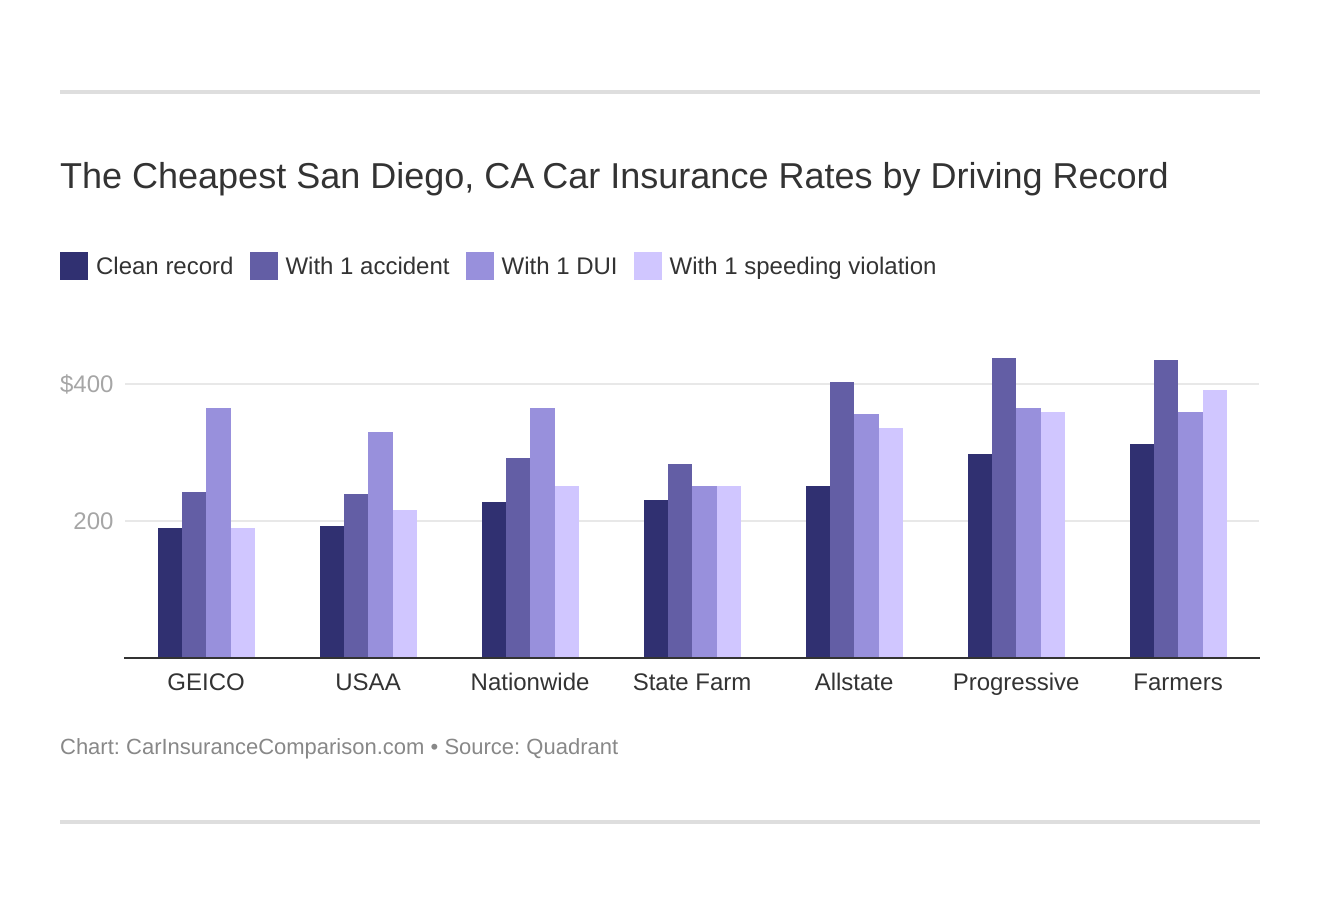 The Cheapest San Diego, CA Car Insurance Rates by Driving Record